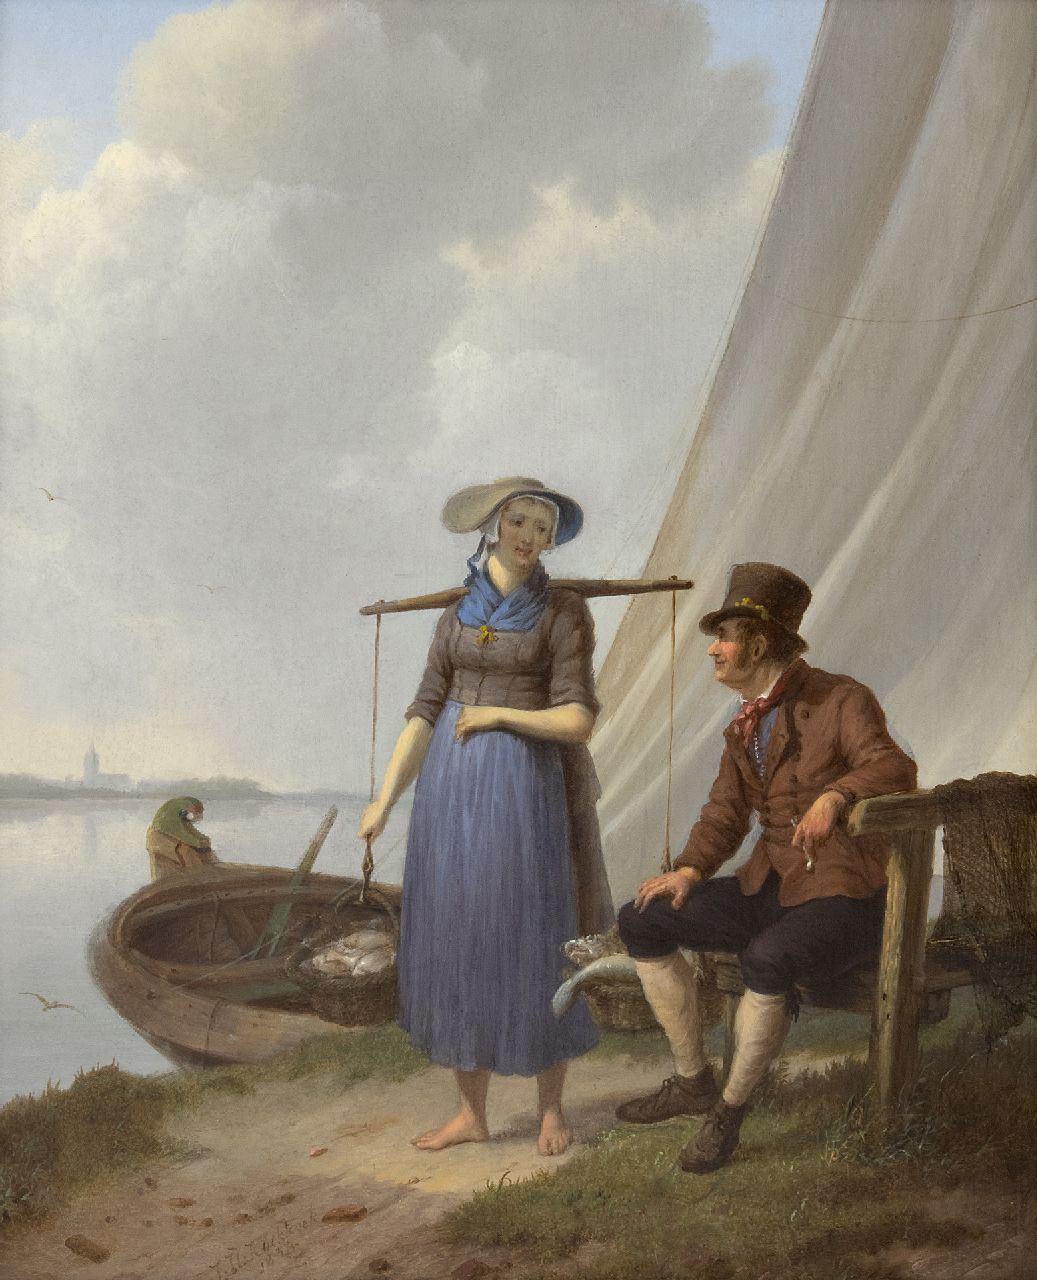 Koekkoek J.H.  | Johannes Hermanus Koekkoek | Paintings offered for sale | A fisherman and woman, chatting, oil on panel 33.1 x 26.9 cm, signed l.c. and dated 1834